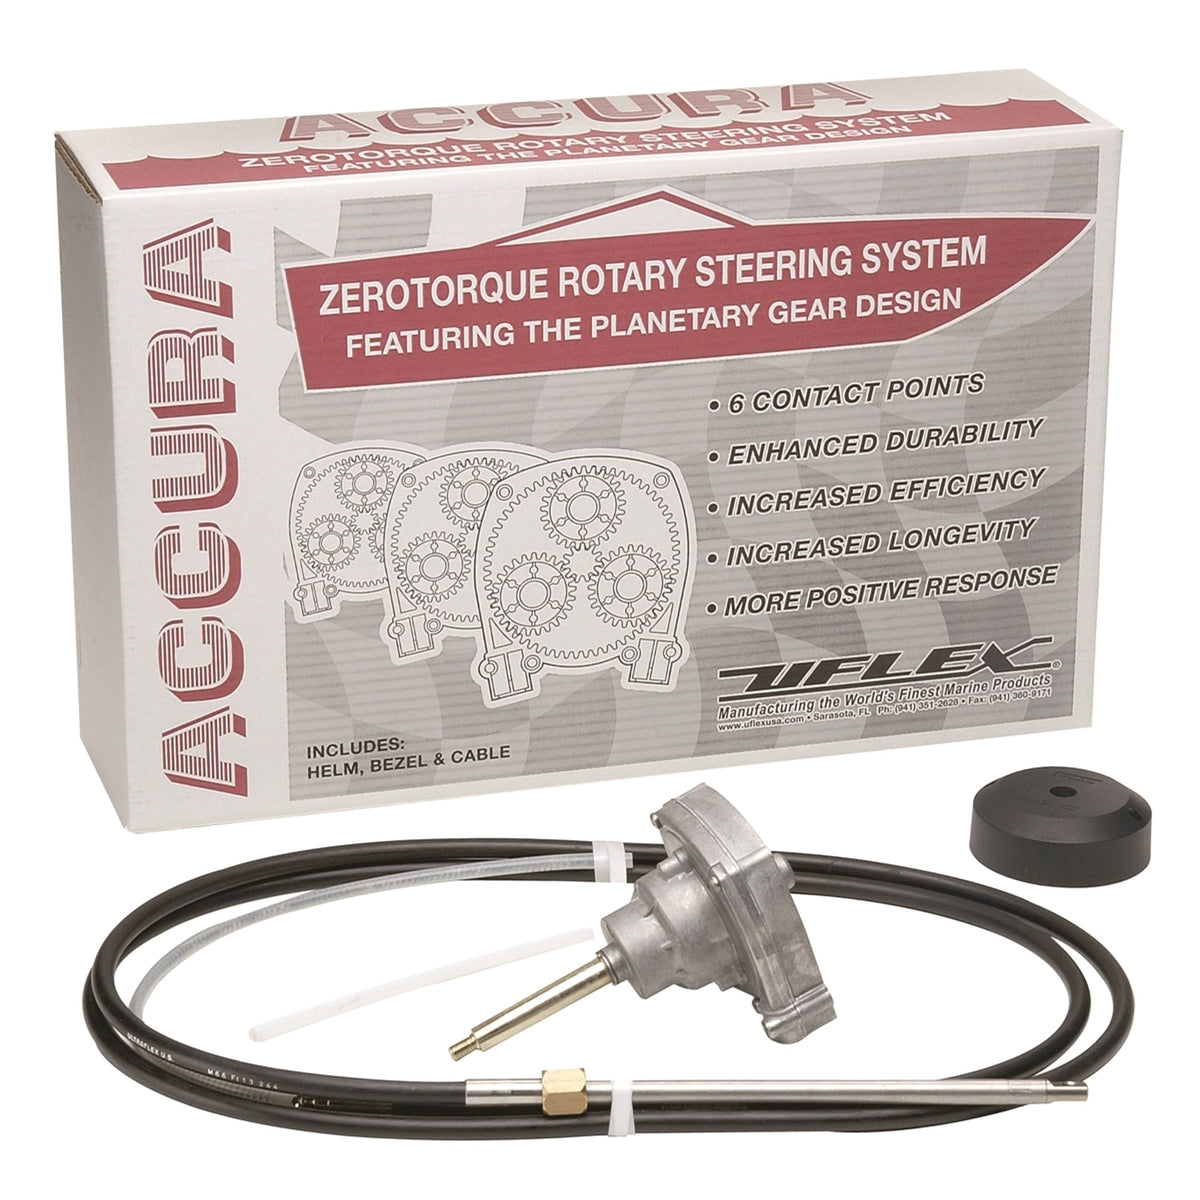 Uflex USA Qualifies for Free Shipping Uflex Rotary Steering Package 12' #ACCURA12